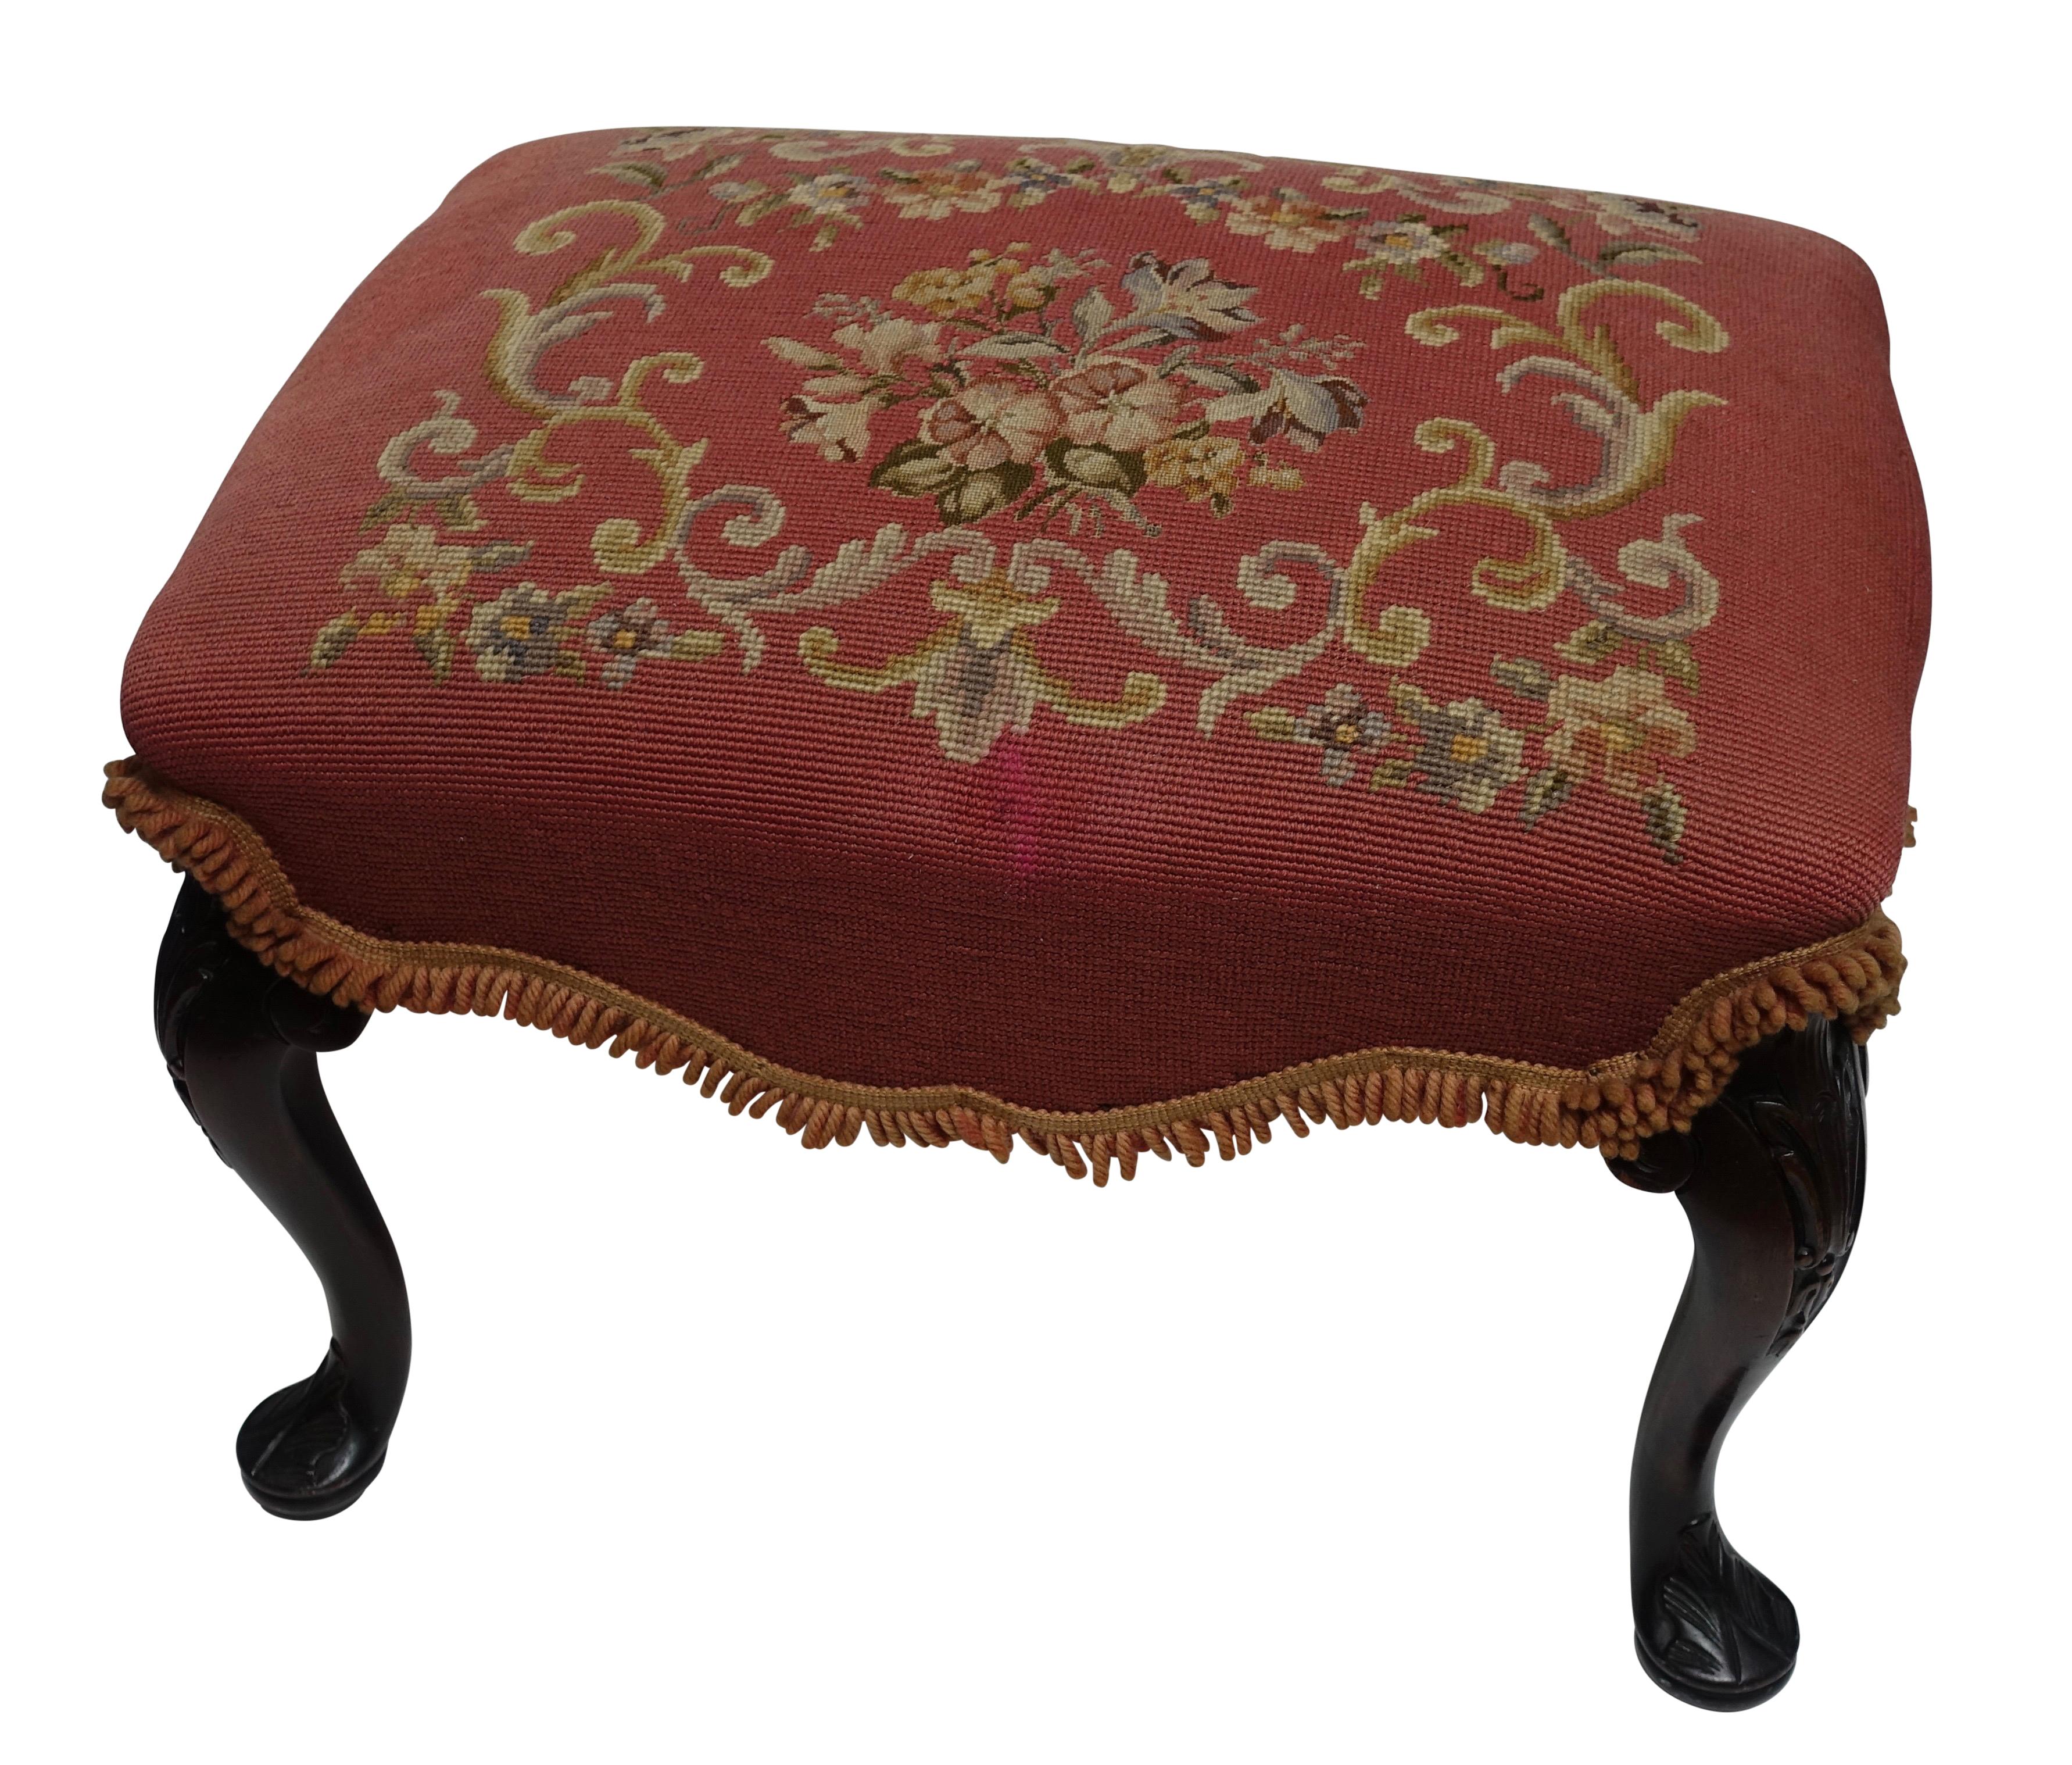 A lovely Queen Anne style mahogany stool with carved cabriole legs ending in carved pad foot, and having a handmade needle point upholstery. American, circa 1920.